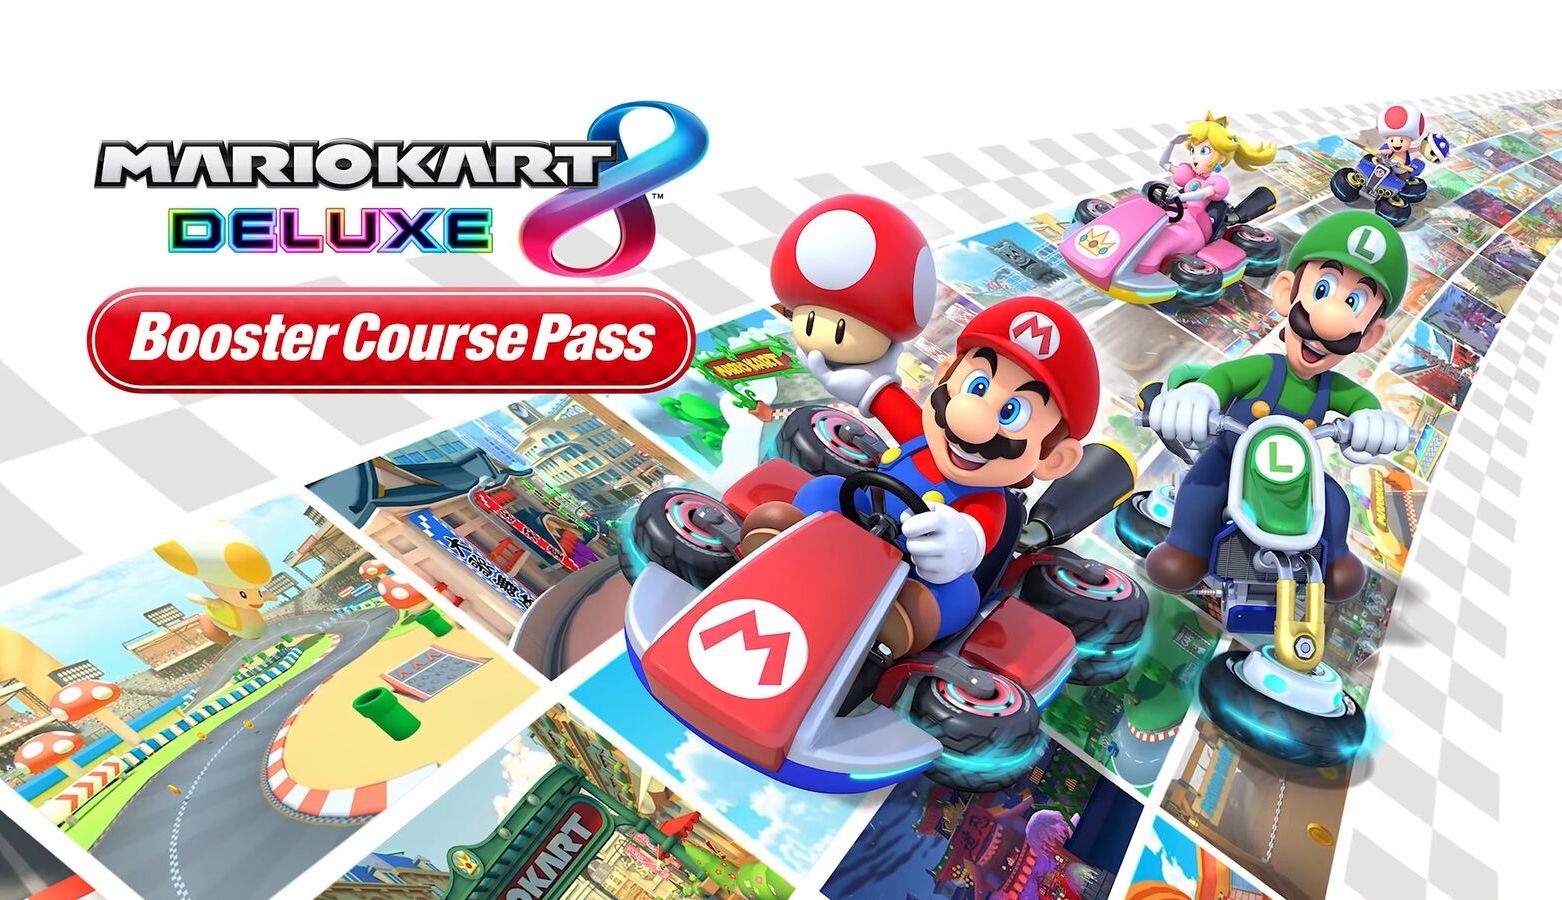 https://gaming-cdn.com/images/products/10449/orig/mario-kart-8-deluxe-booster-streckenpass-switch-switch-spiel-nintendo-eshop-europe-cover.jpg?v=1699456054